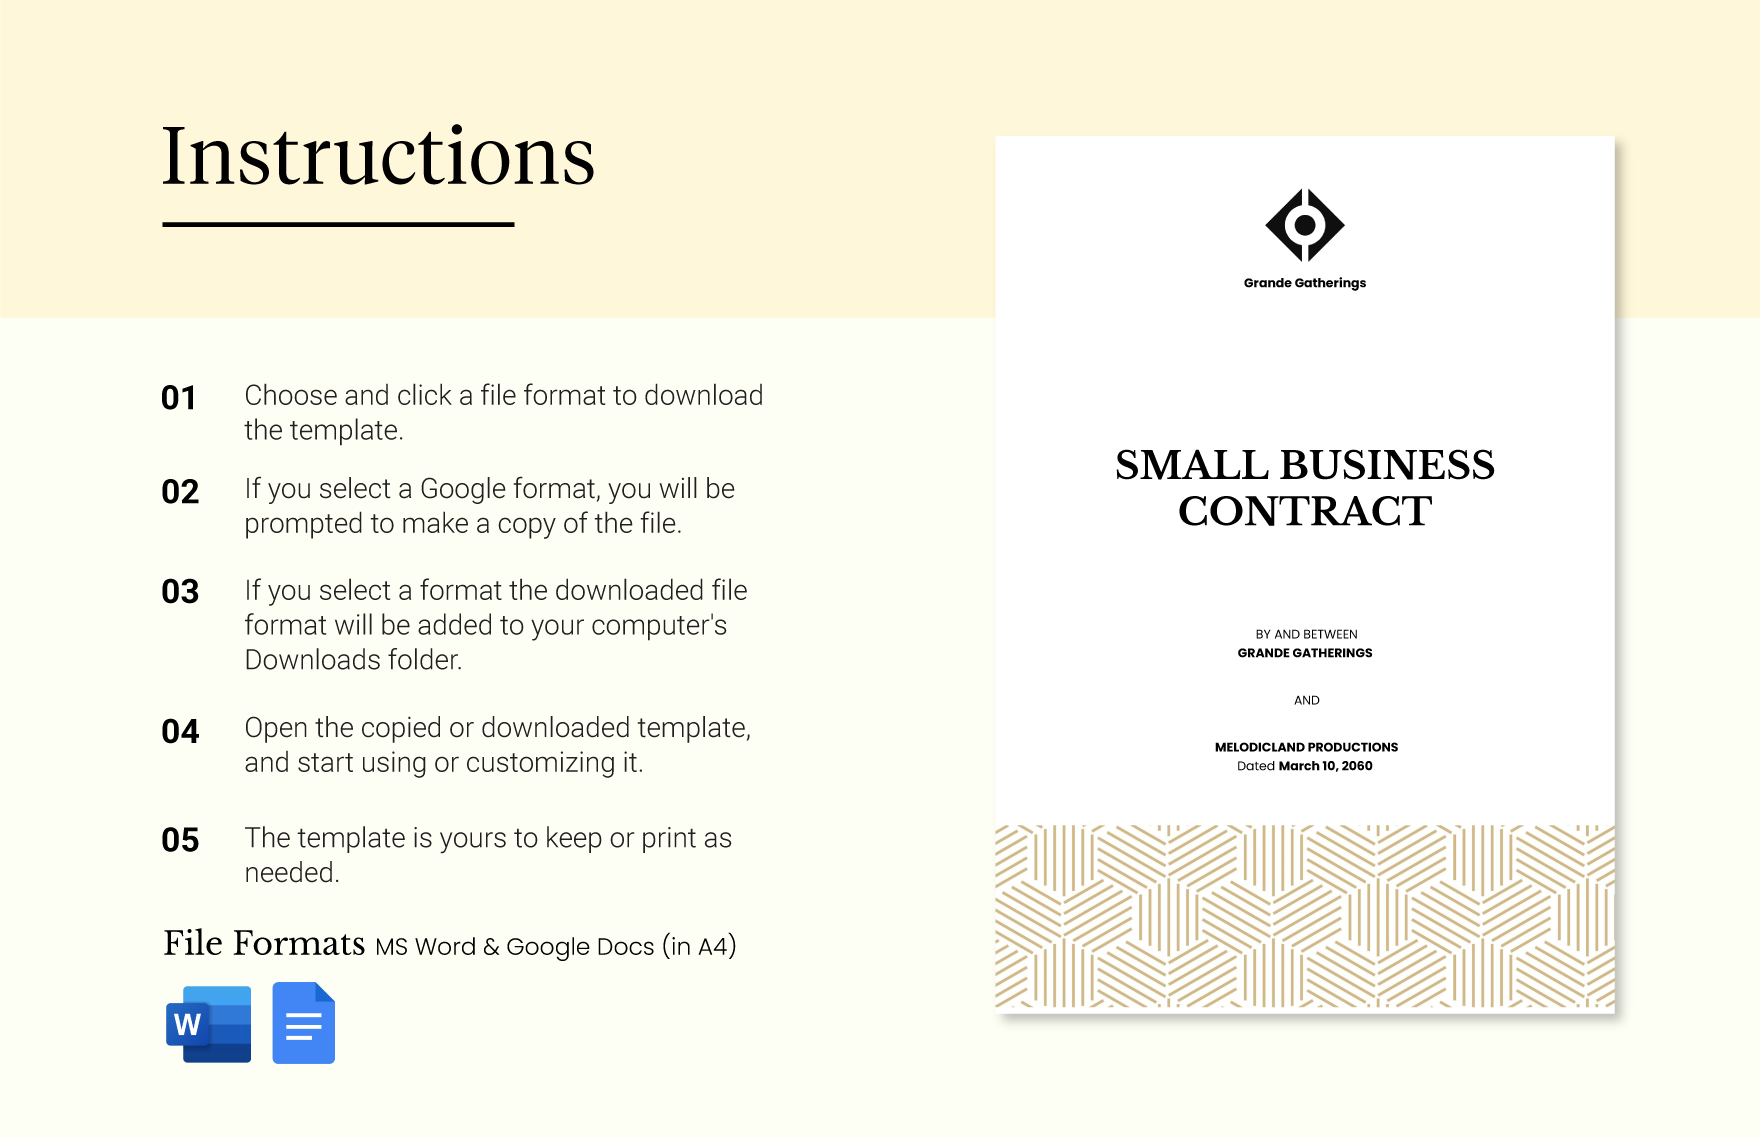 Small Business Contract Template